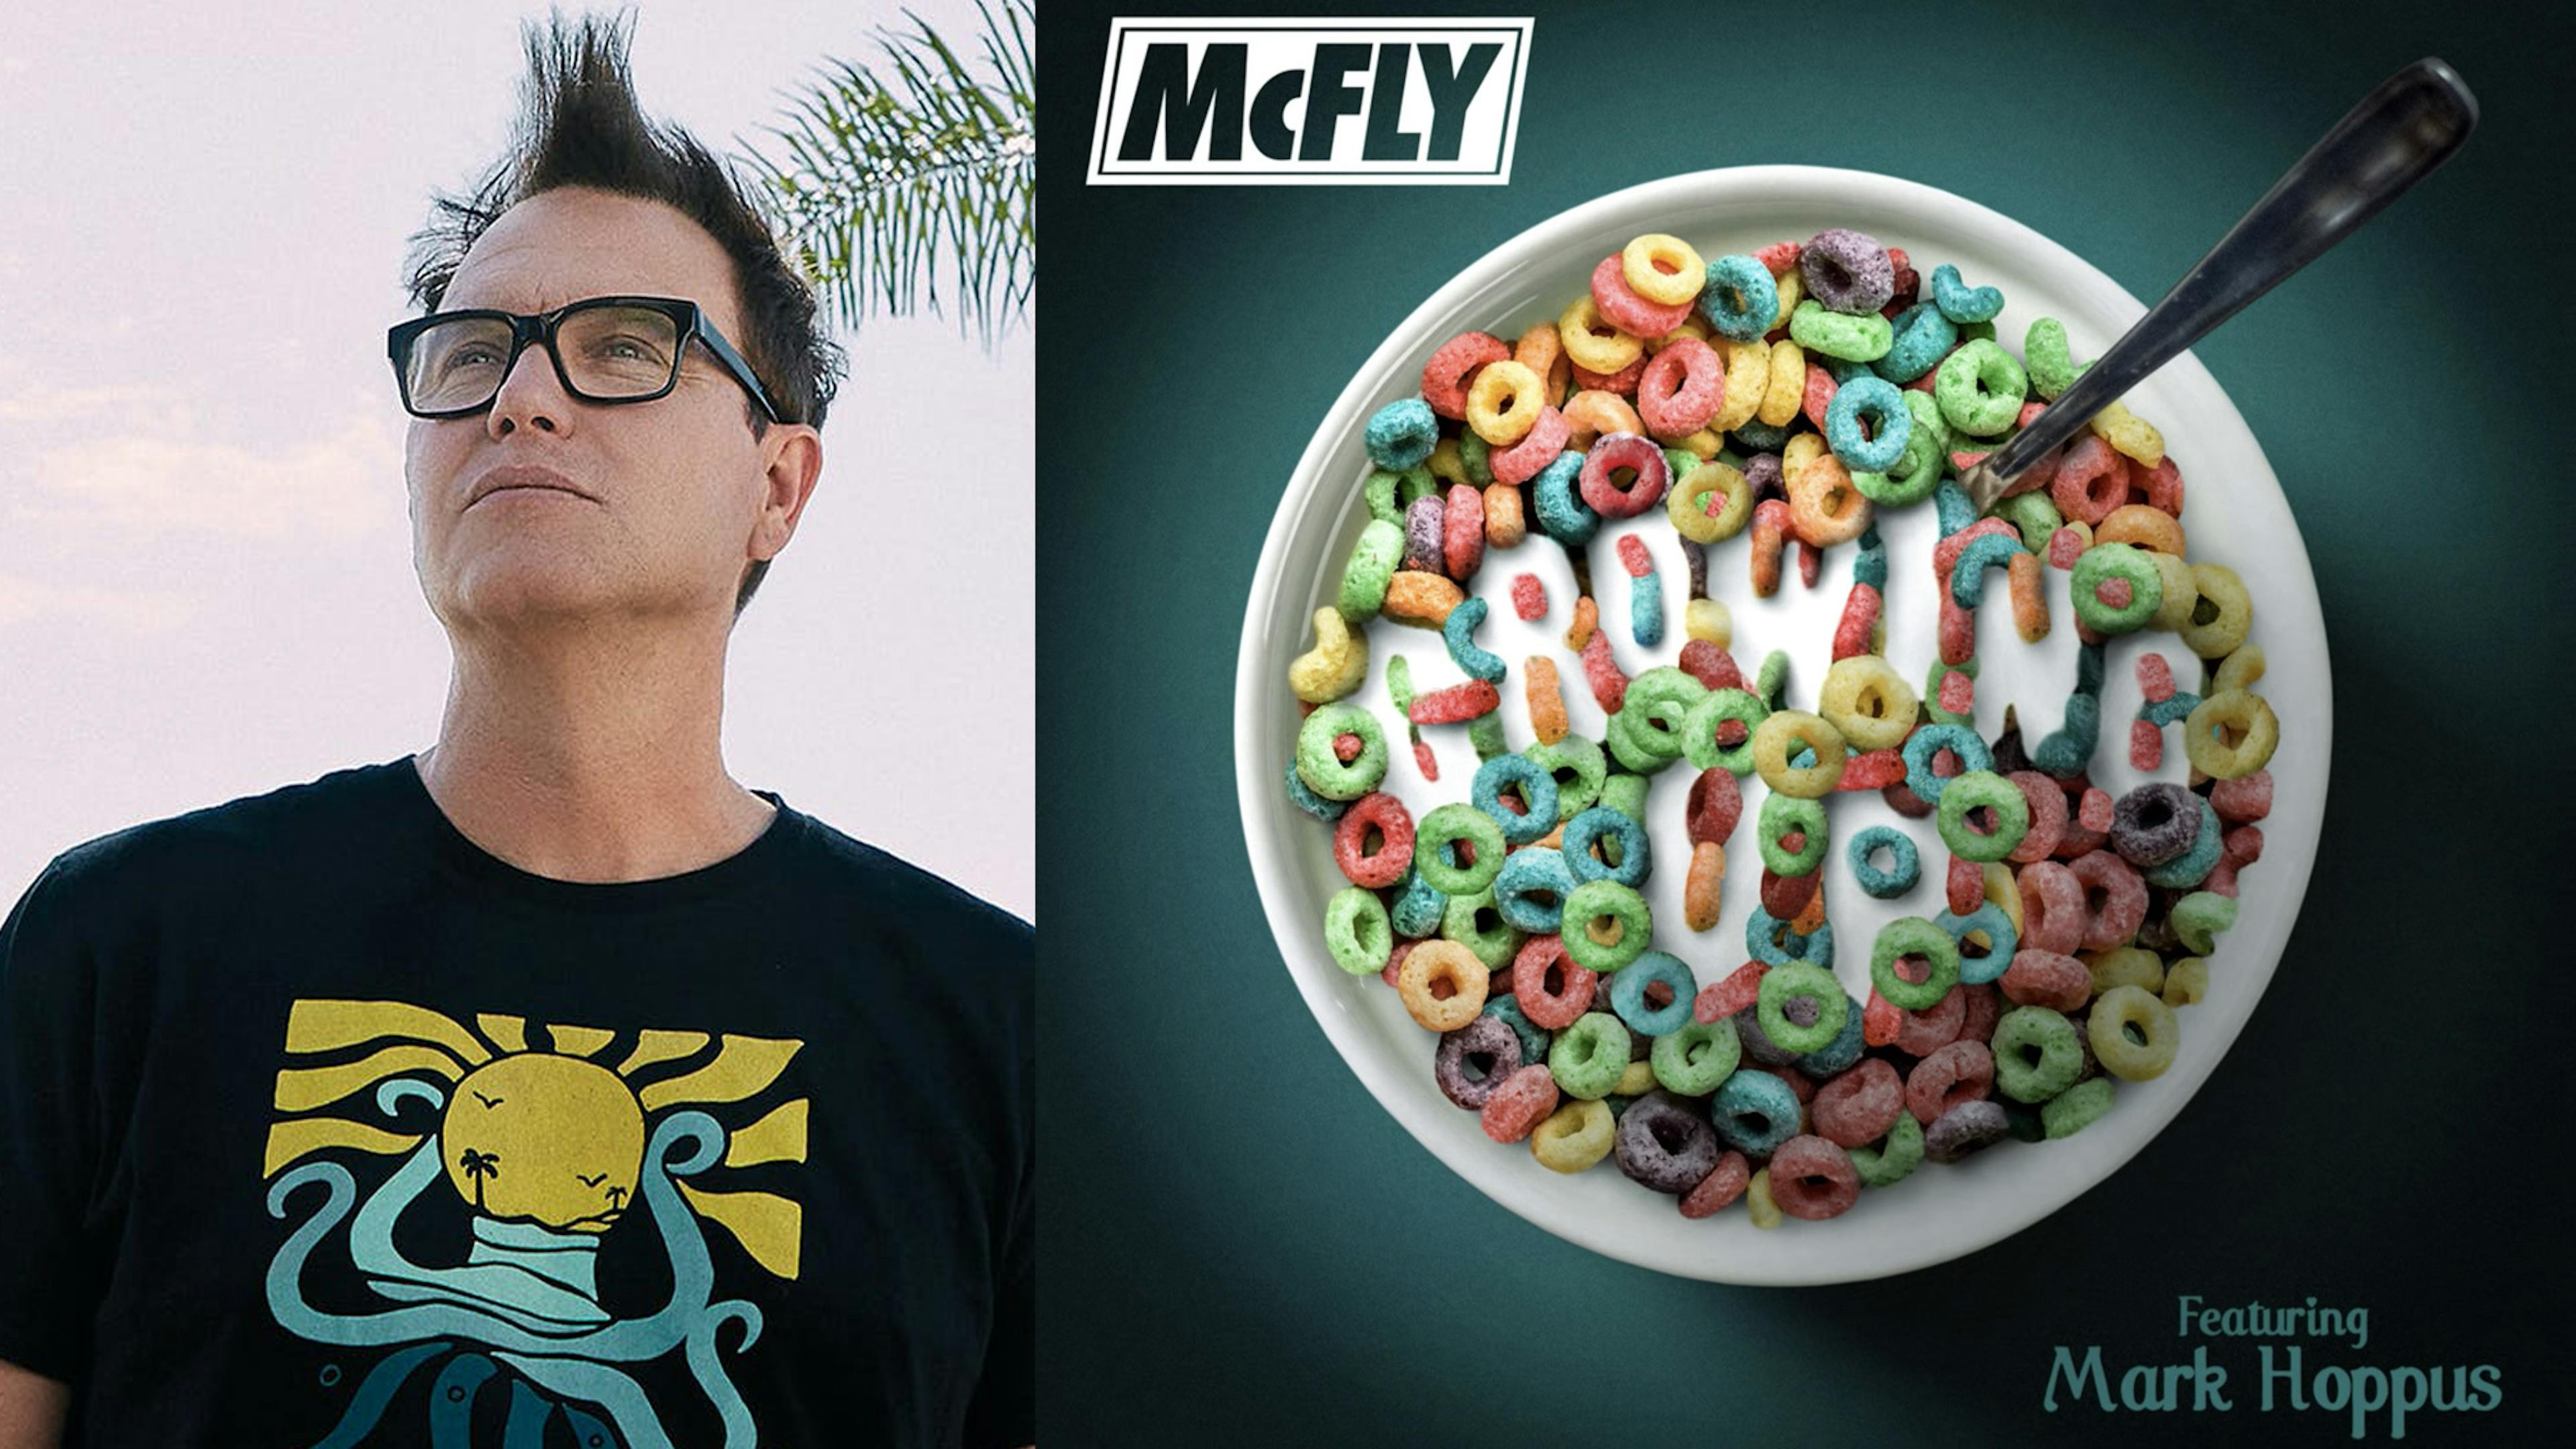 blink-182's Mark Hoppus Is On The New McFly Single, Growing Up